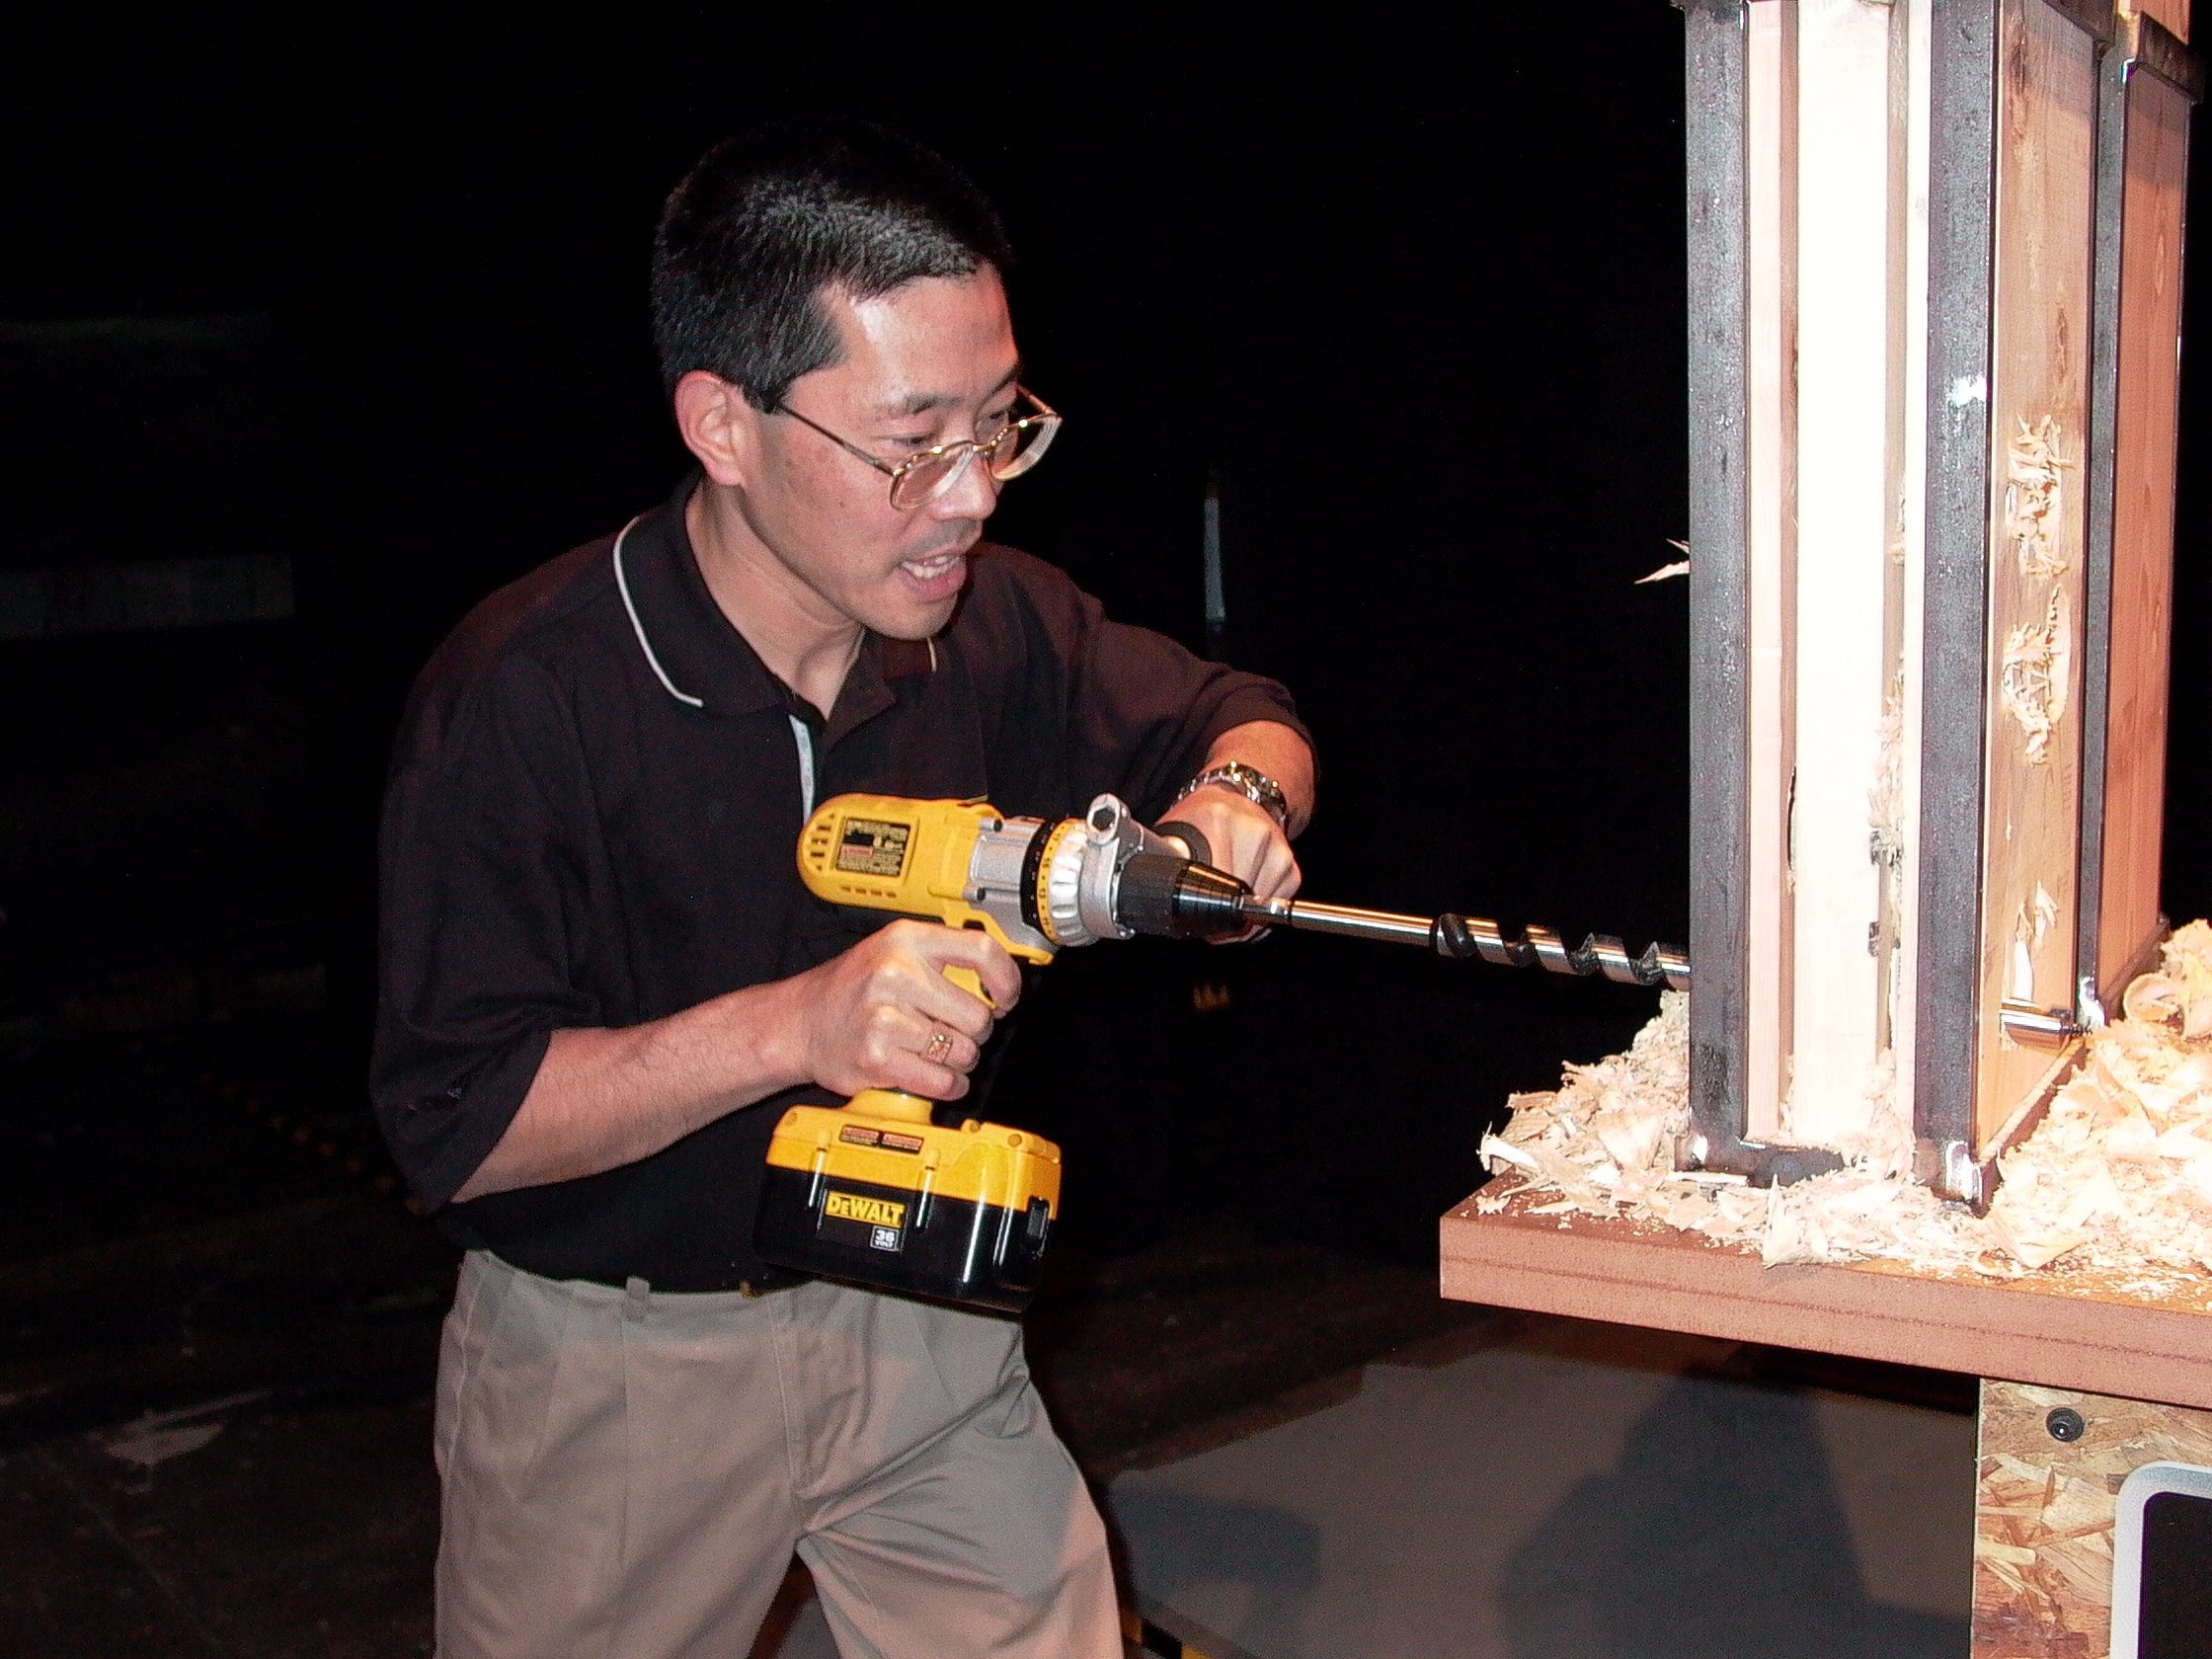 A man uses a power drill.